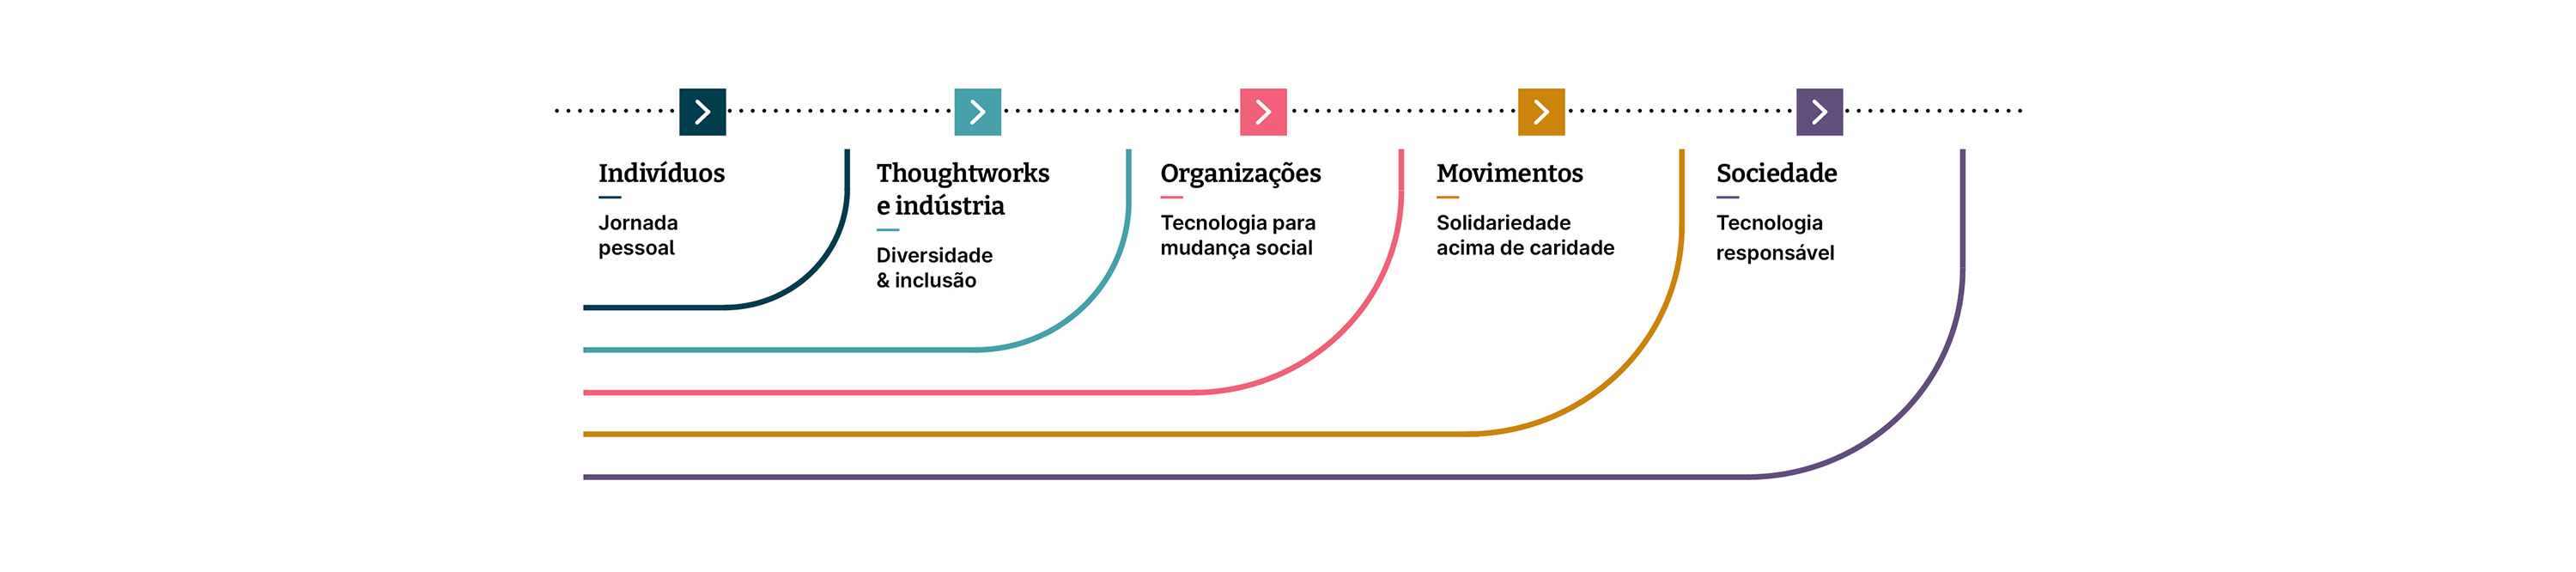 The levers of social change: individual, organizational, industry-level, movements, and society